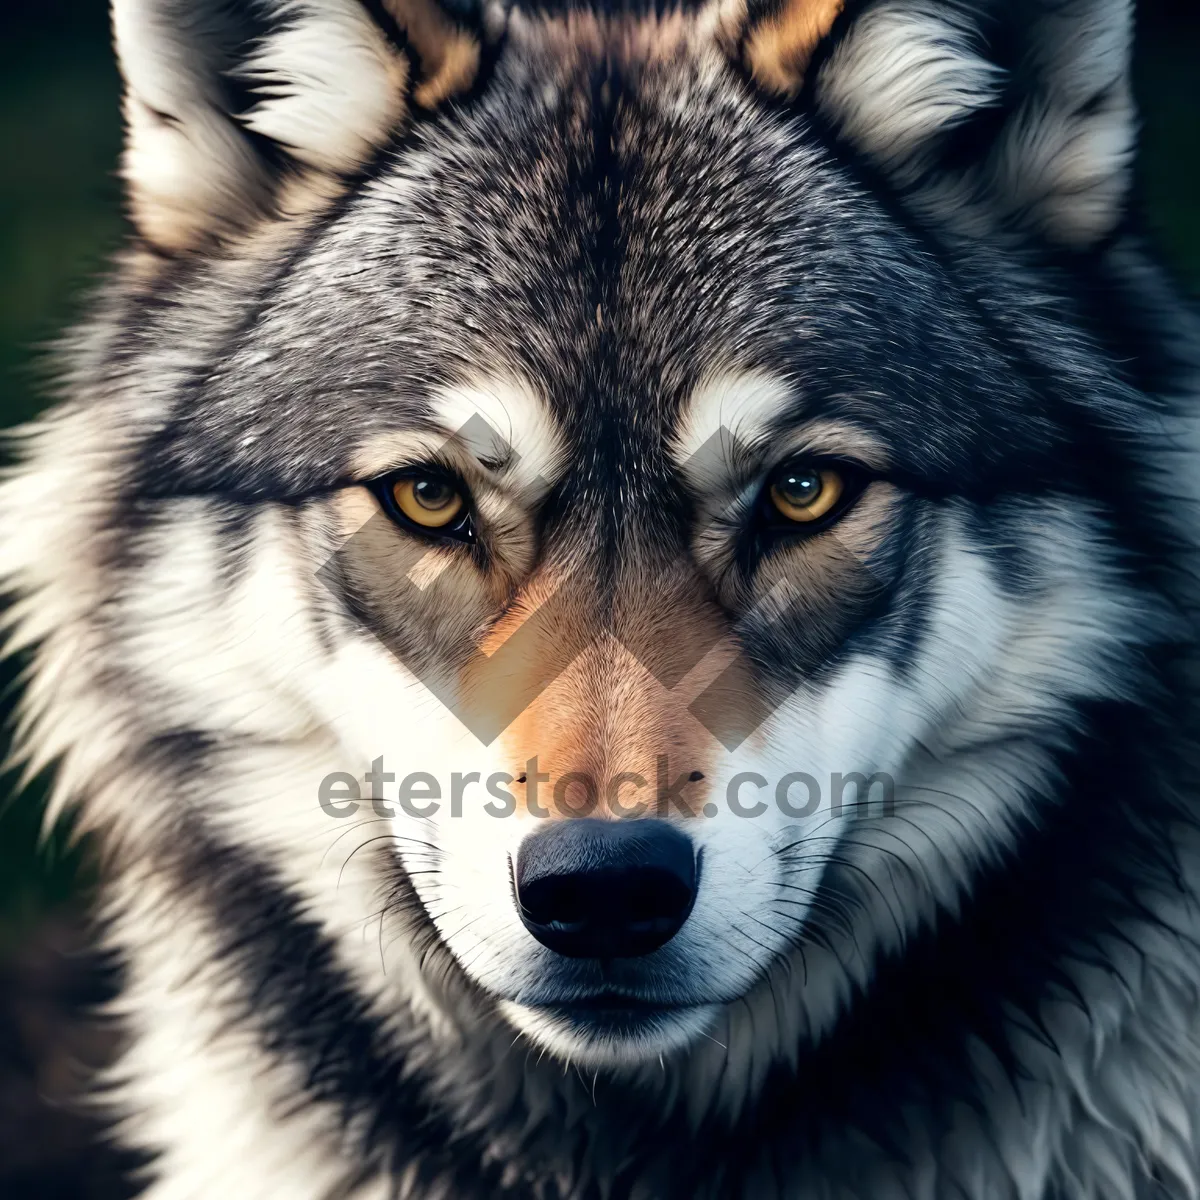 Picture of Fierce Furry Canine Gazing With Intense Eyes